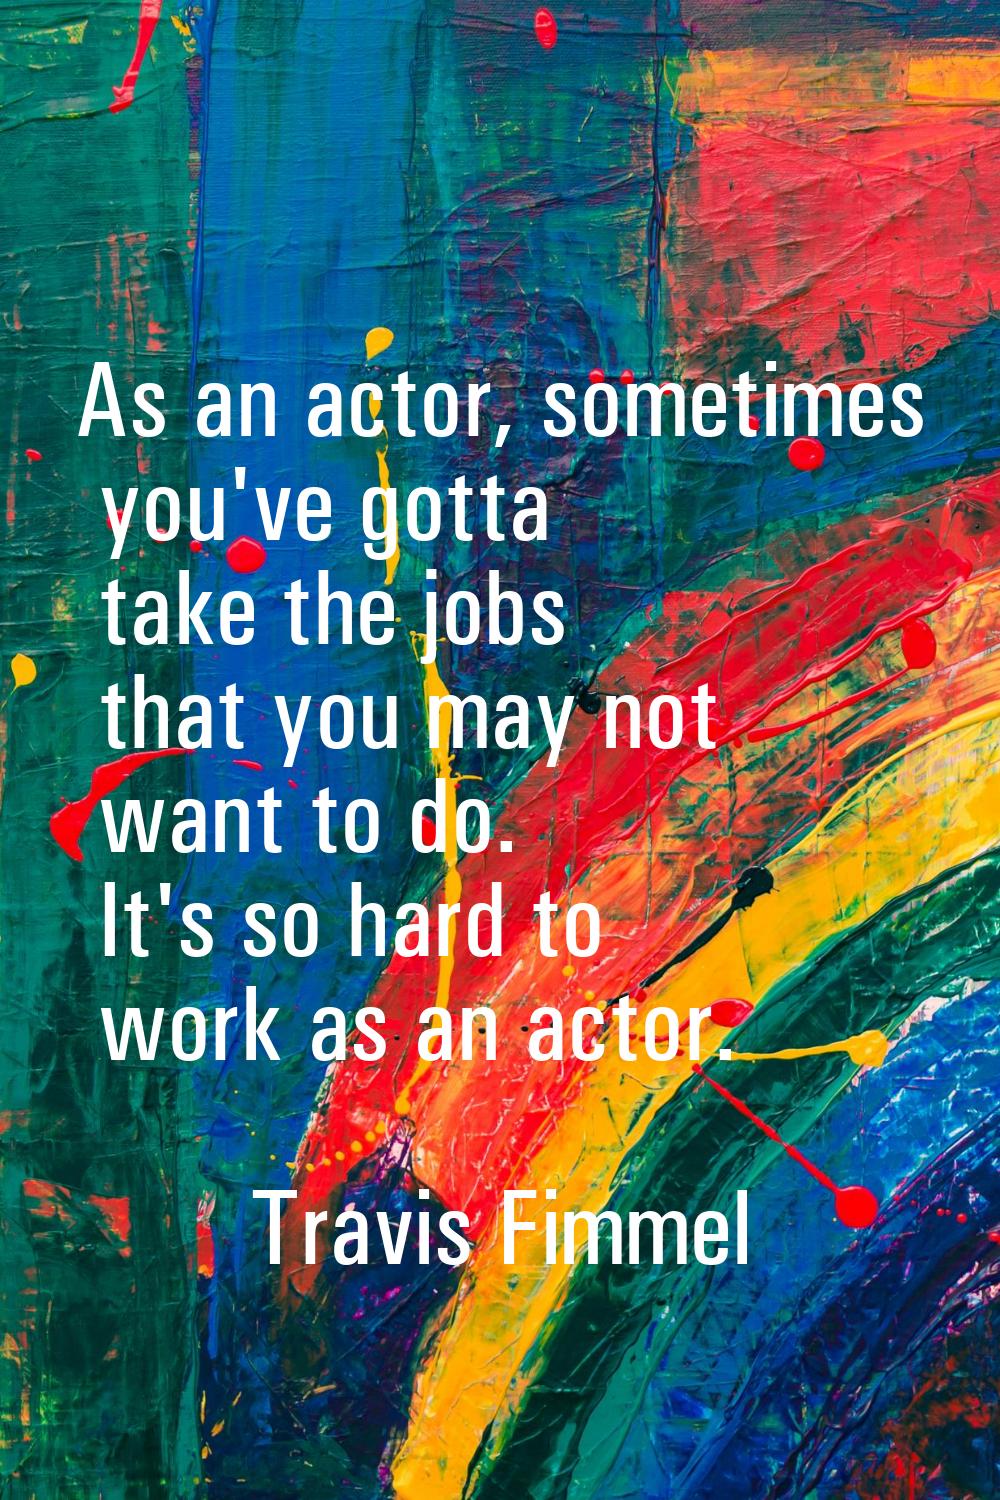 As an actor, sometimes you've gotta take the jobs that you may not want to do. It's so hard to work